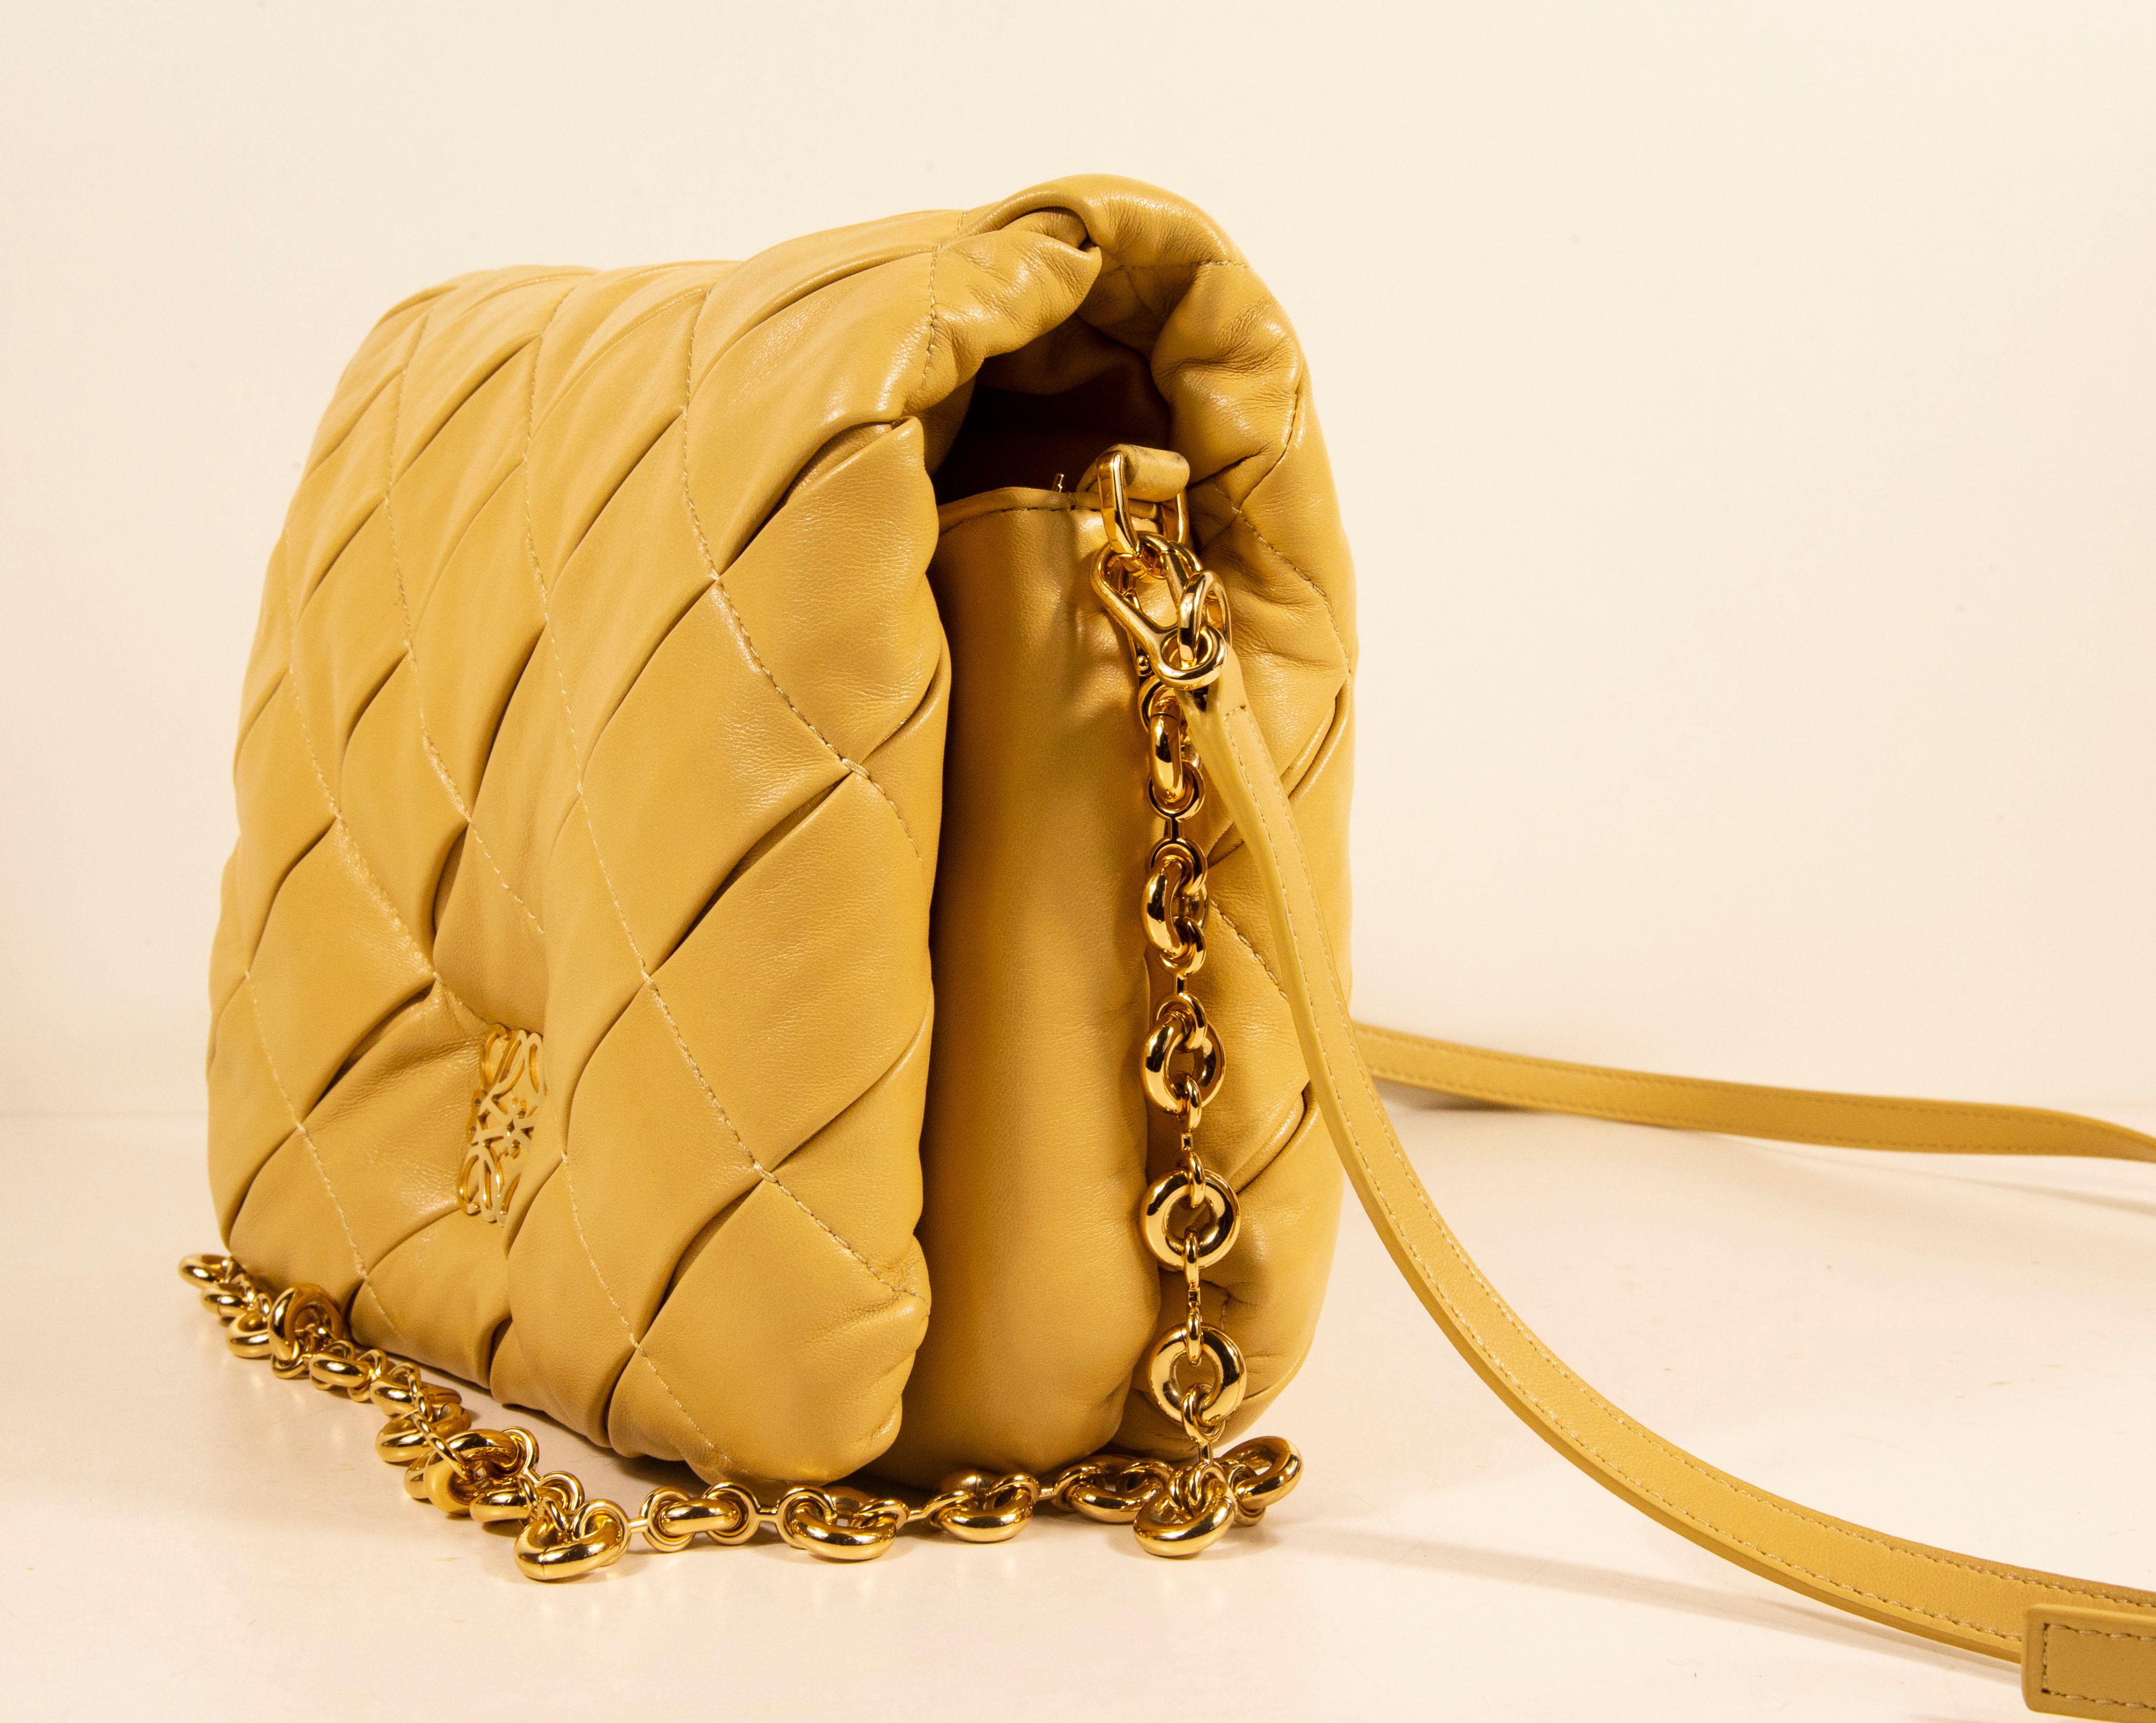 The Loewe's Goya Puffer bag made of camel-hued lamb leather and filled with goose feather. The hardware is gold toned. The interior features one major compartment and two side pockets of which one has a zipper. The bag can be worn as a shoulder bag